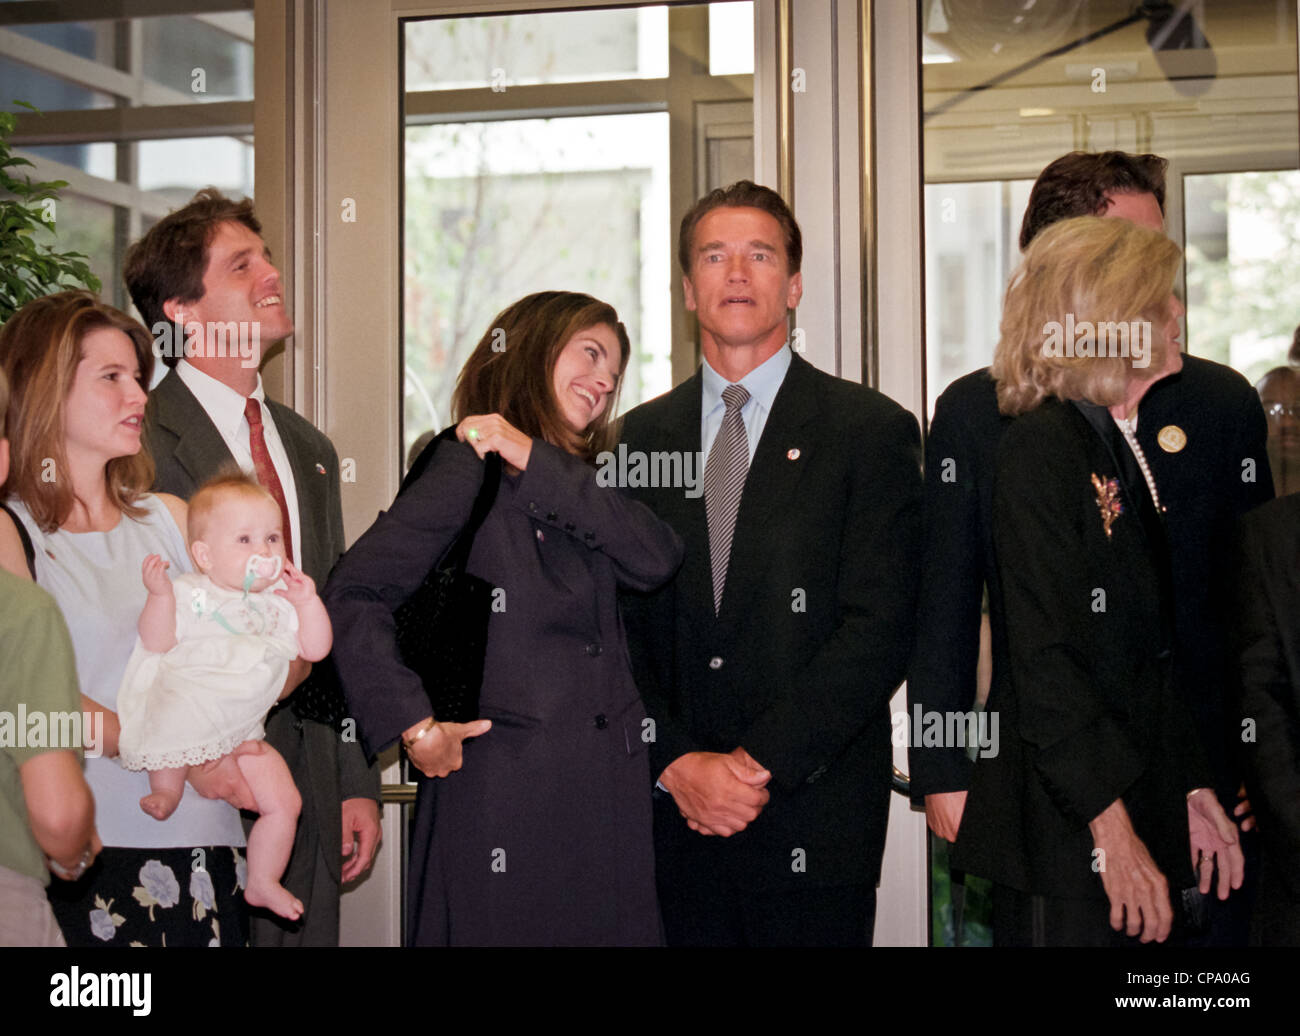 Actor Arnold Schwarzenegger with his wife Maria Shriver at the dedication of the Peace Corps headquarters September 15, 1998 in Washington, DC. Stock Photo